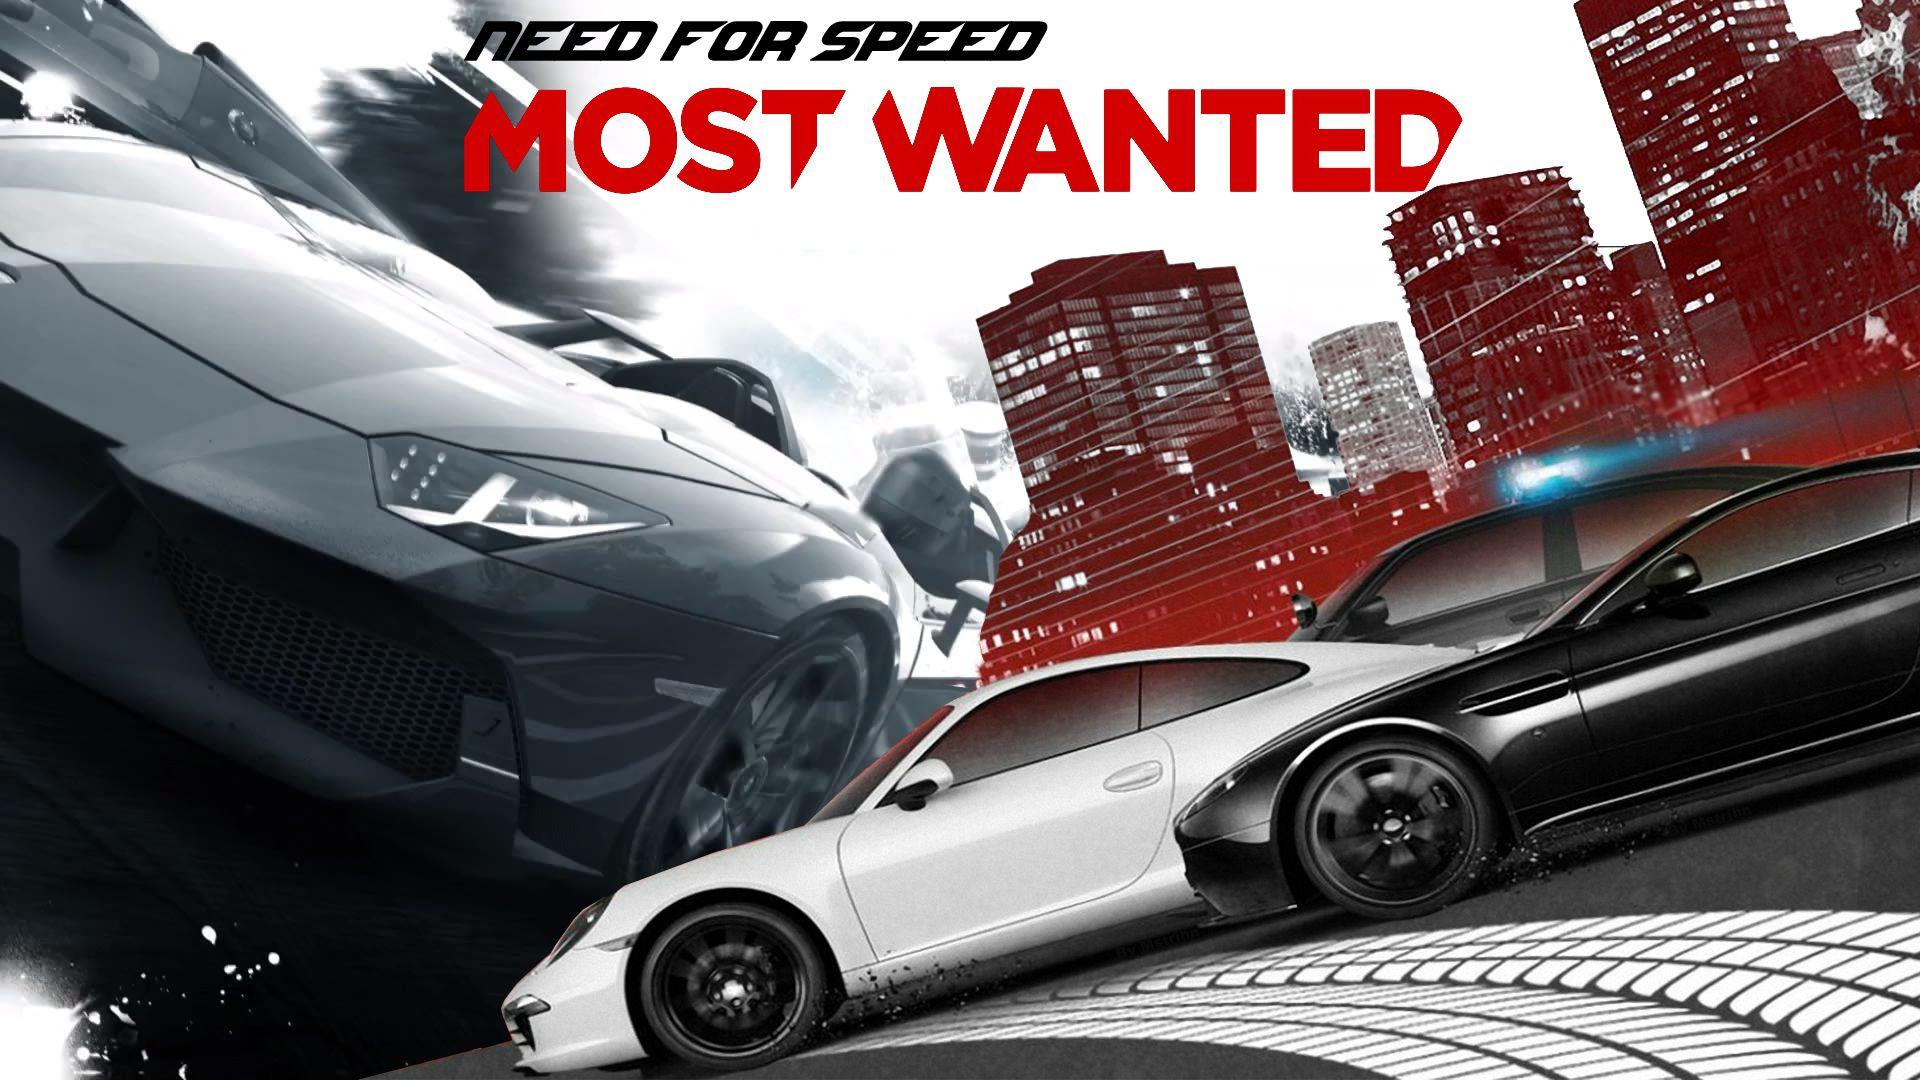 Need for Speed Most Wanted HD Big Wallpaper 2014 Wallpaper HD